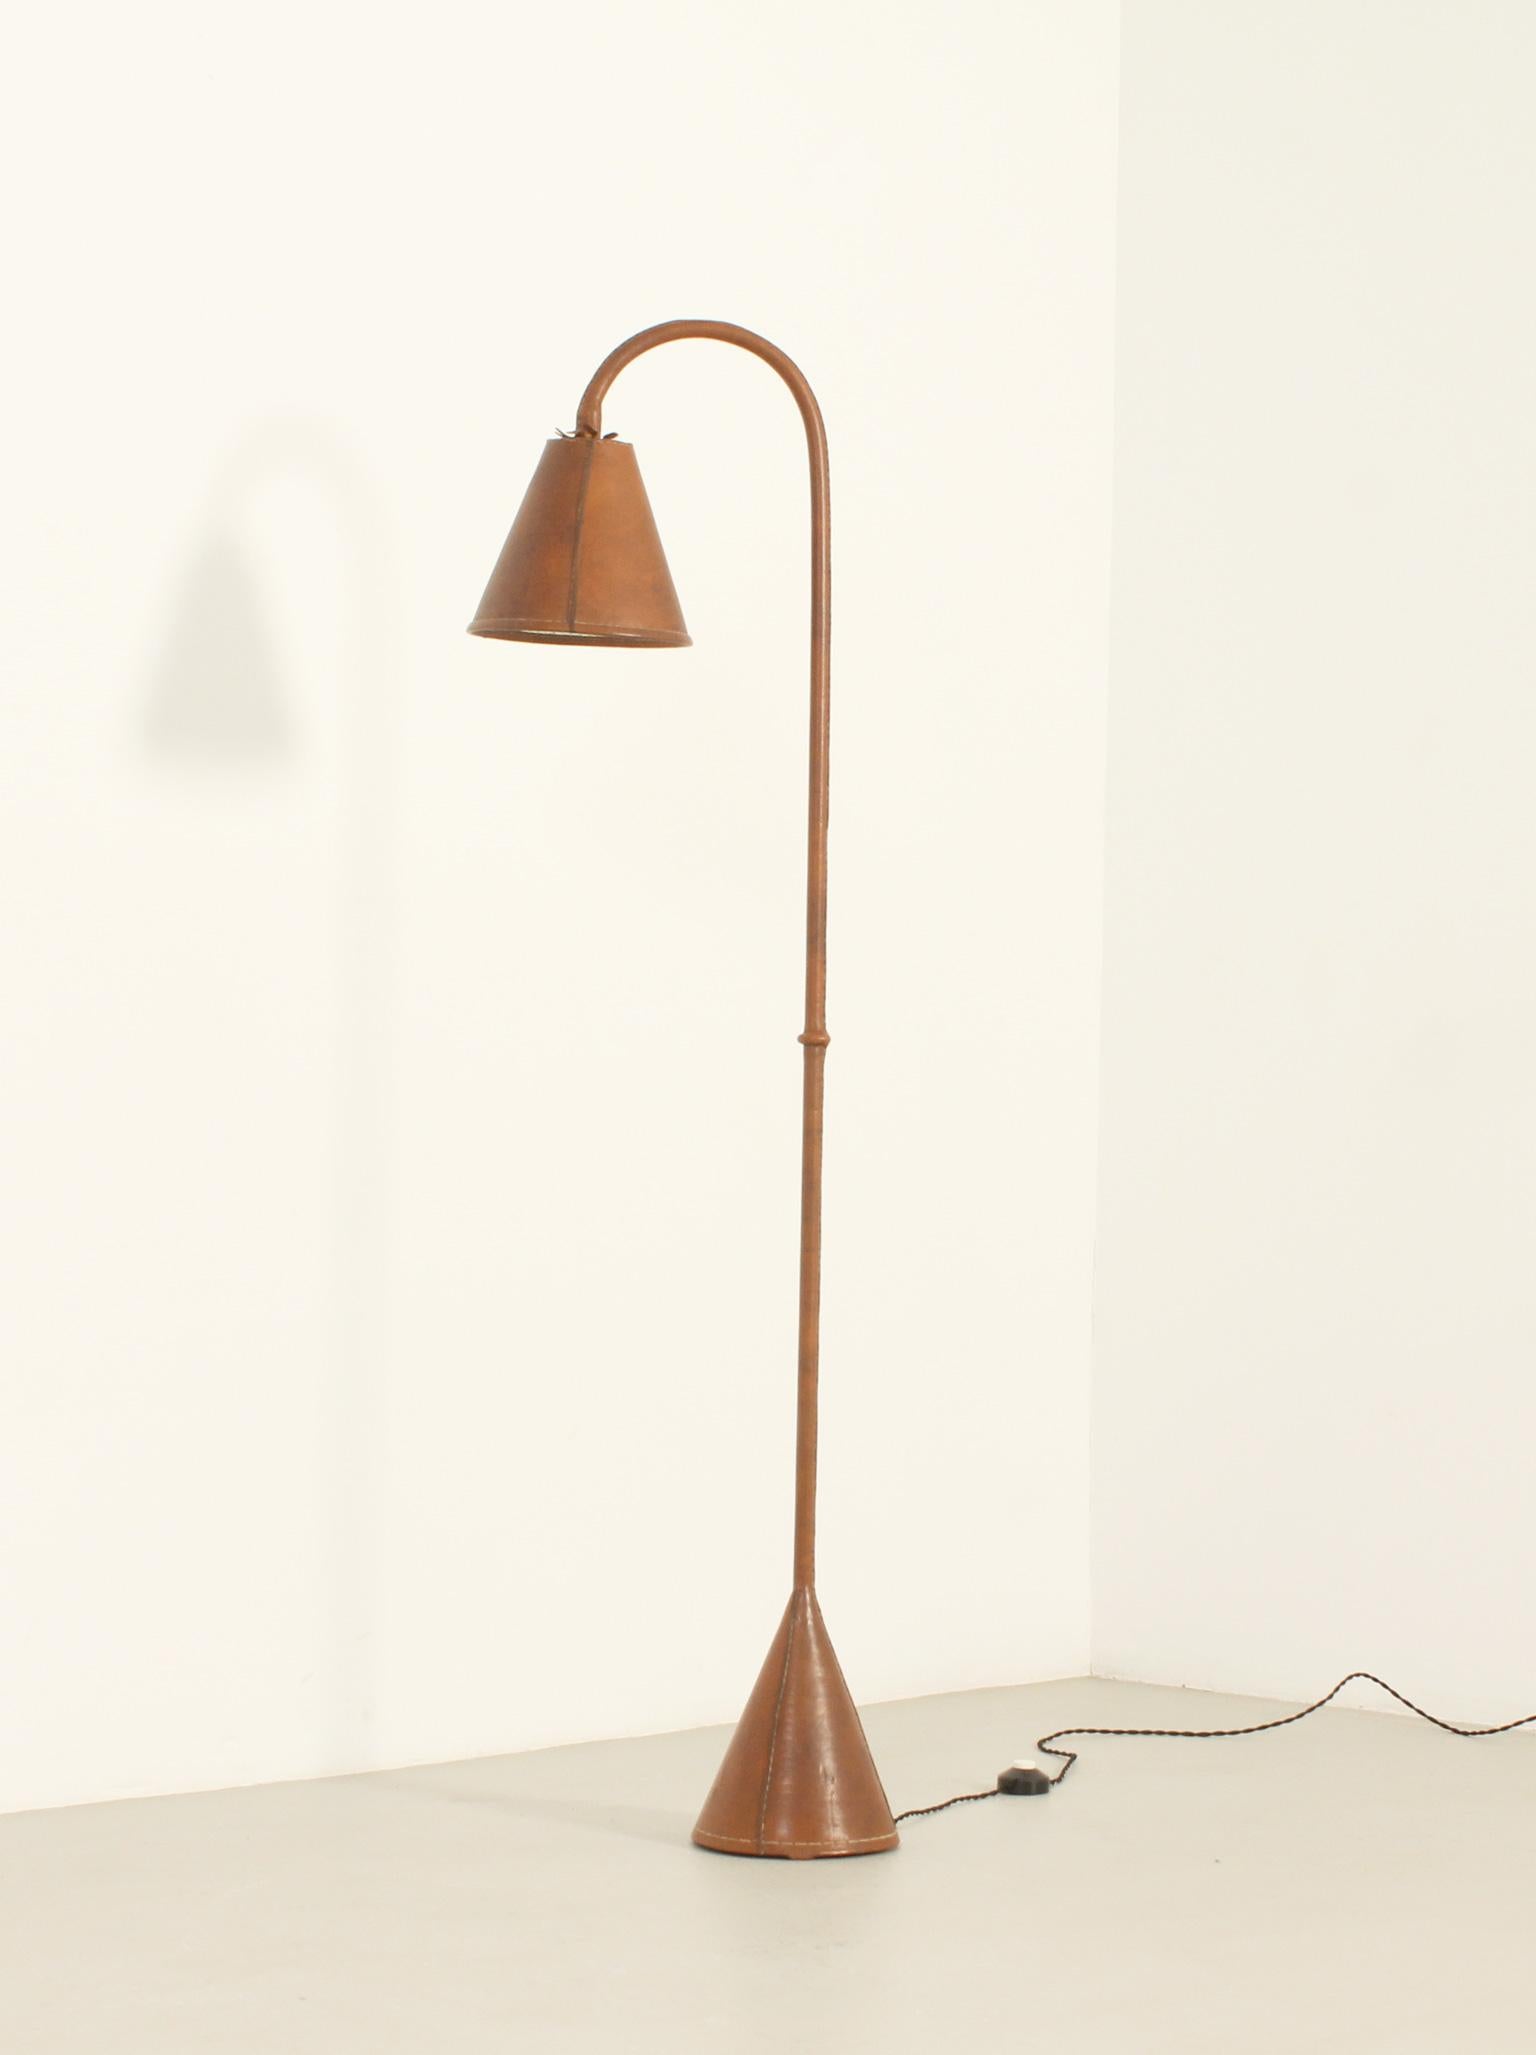 Spanish Floor Lamp by Valenti in Brown Leather, Spain, 1950's For Sale